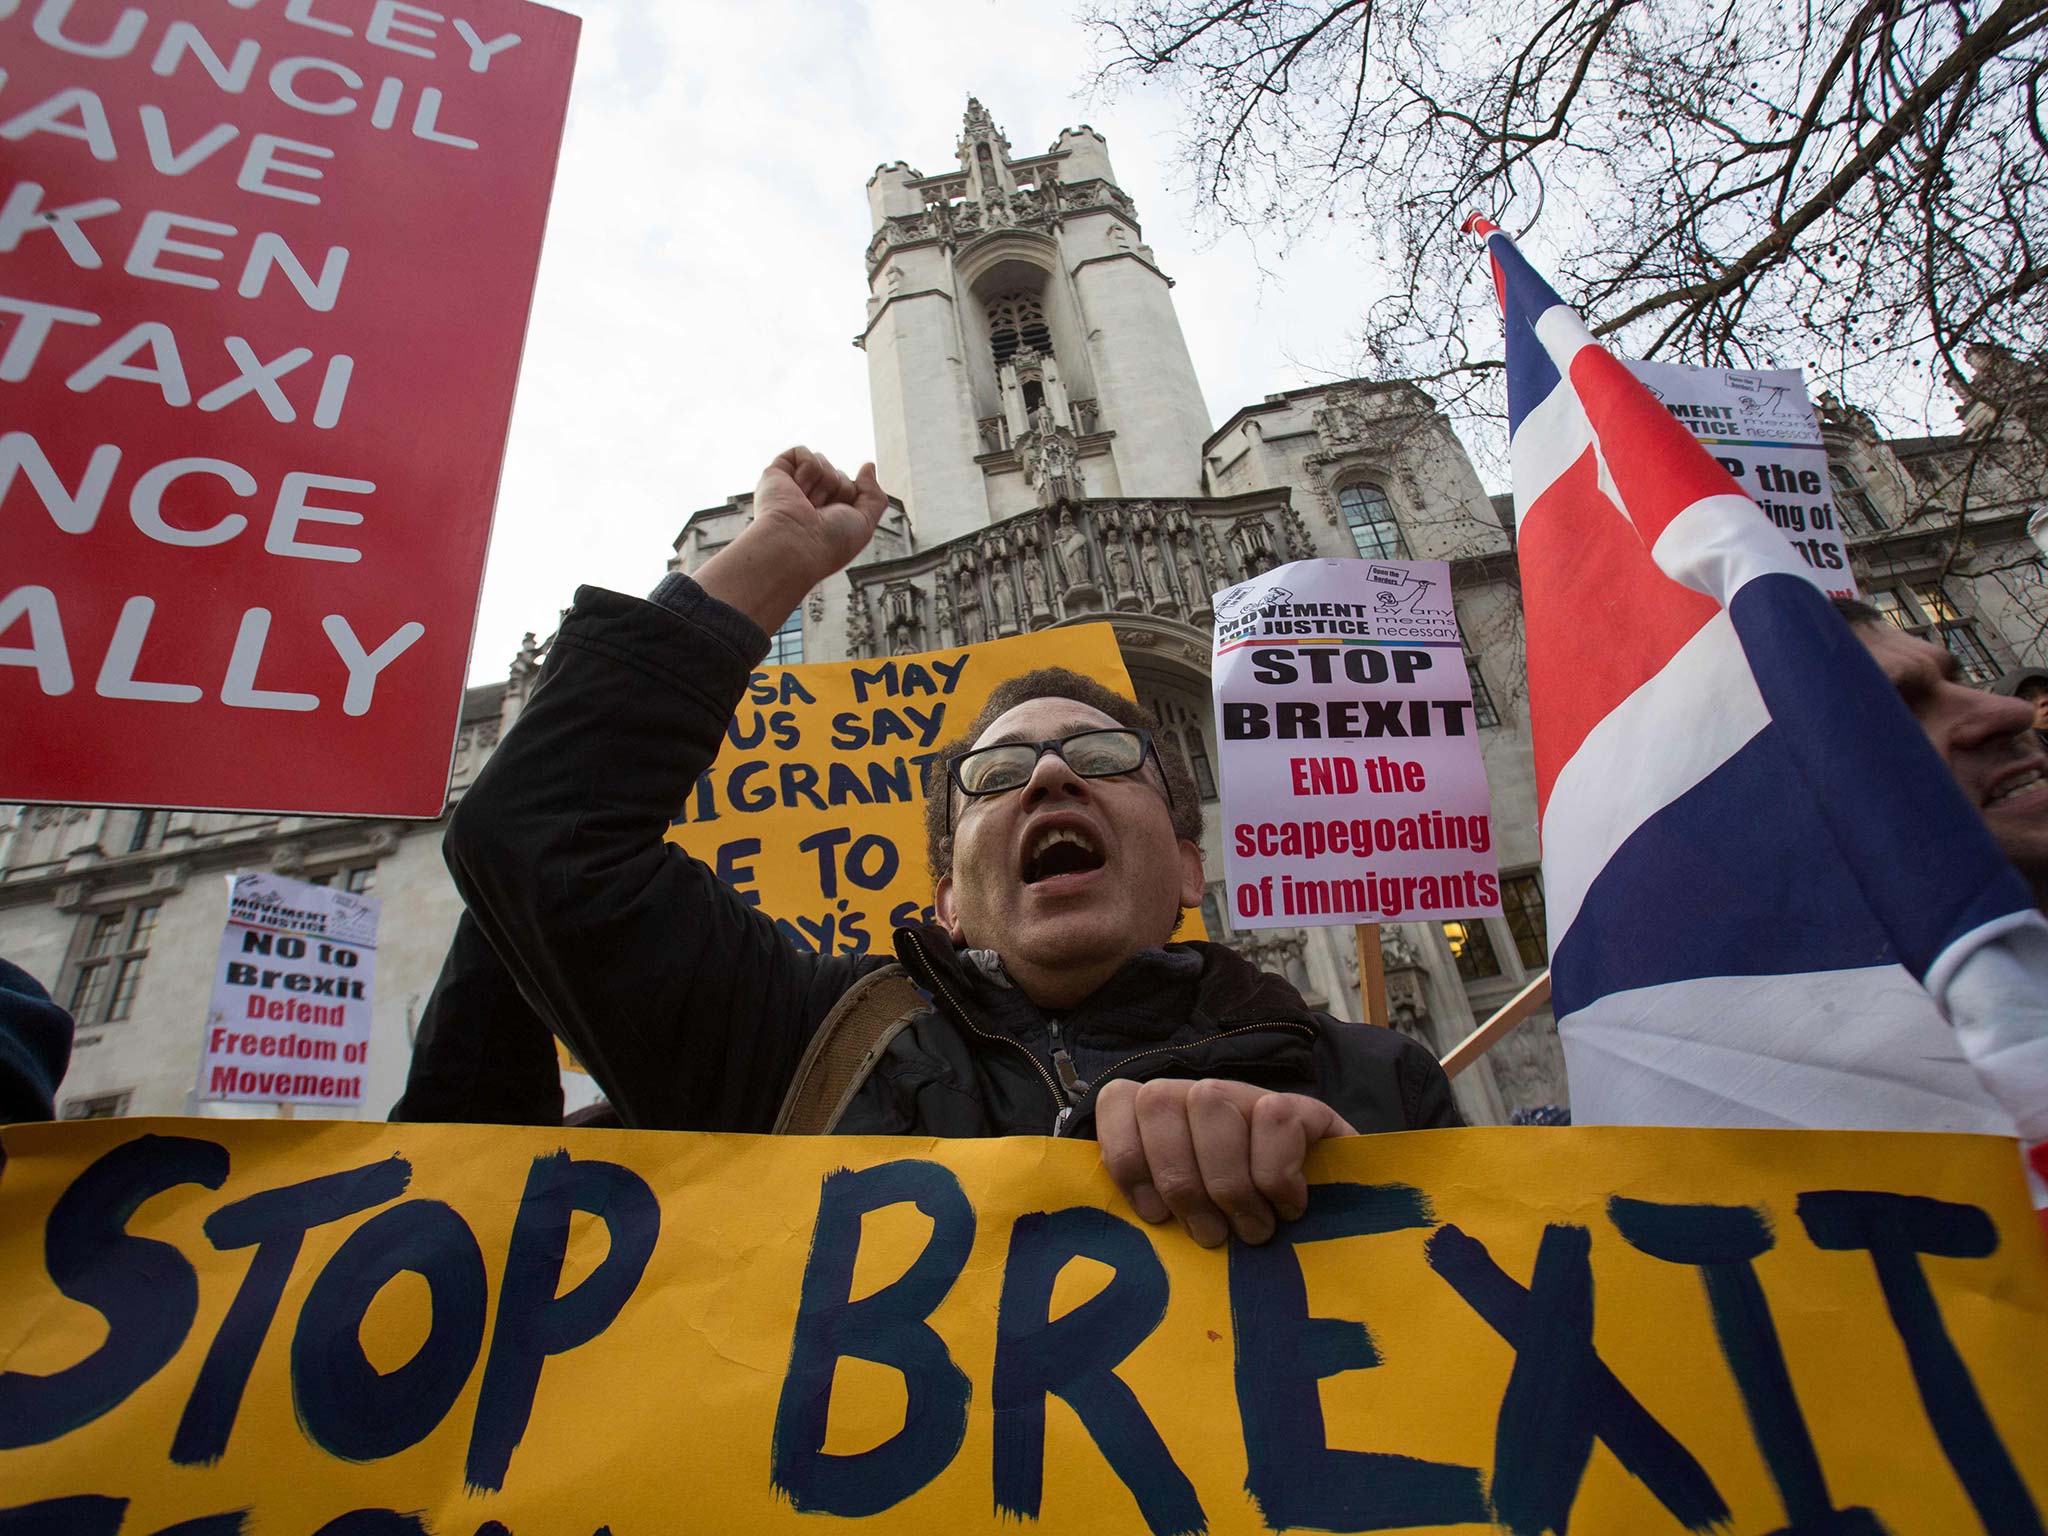 Anti-Brexit demonstrators protest outside the Supreme Court in London yesterday